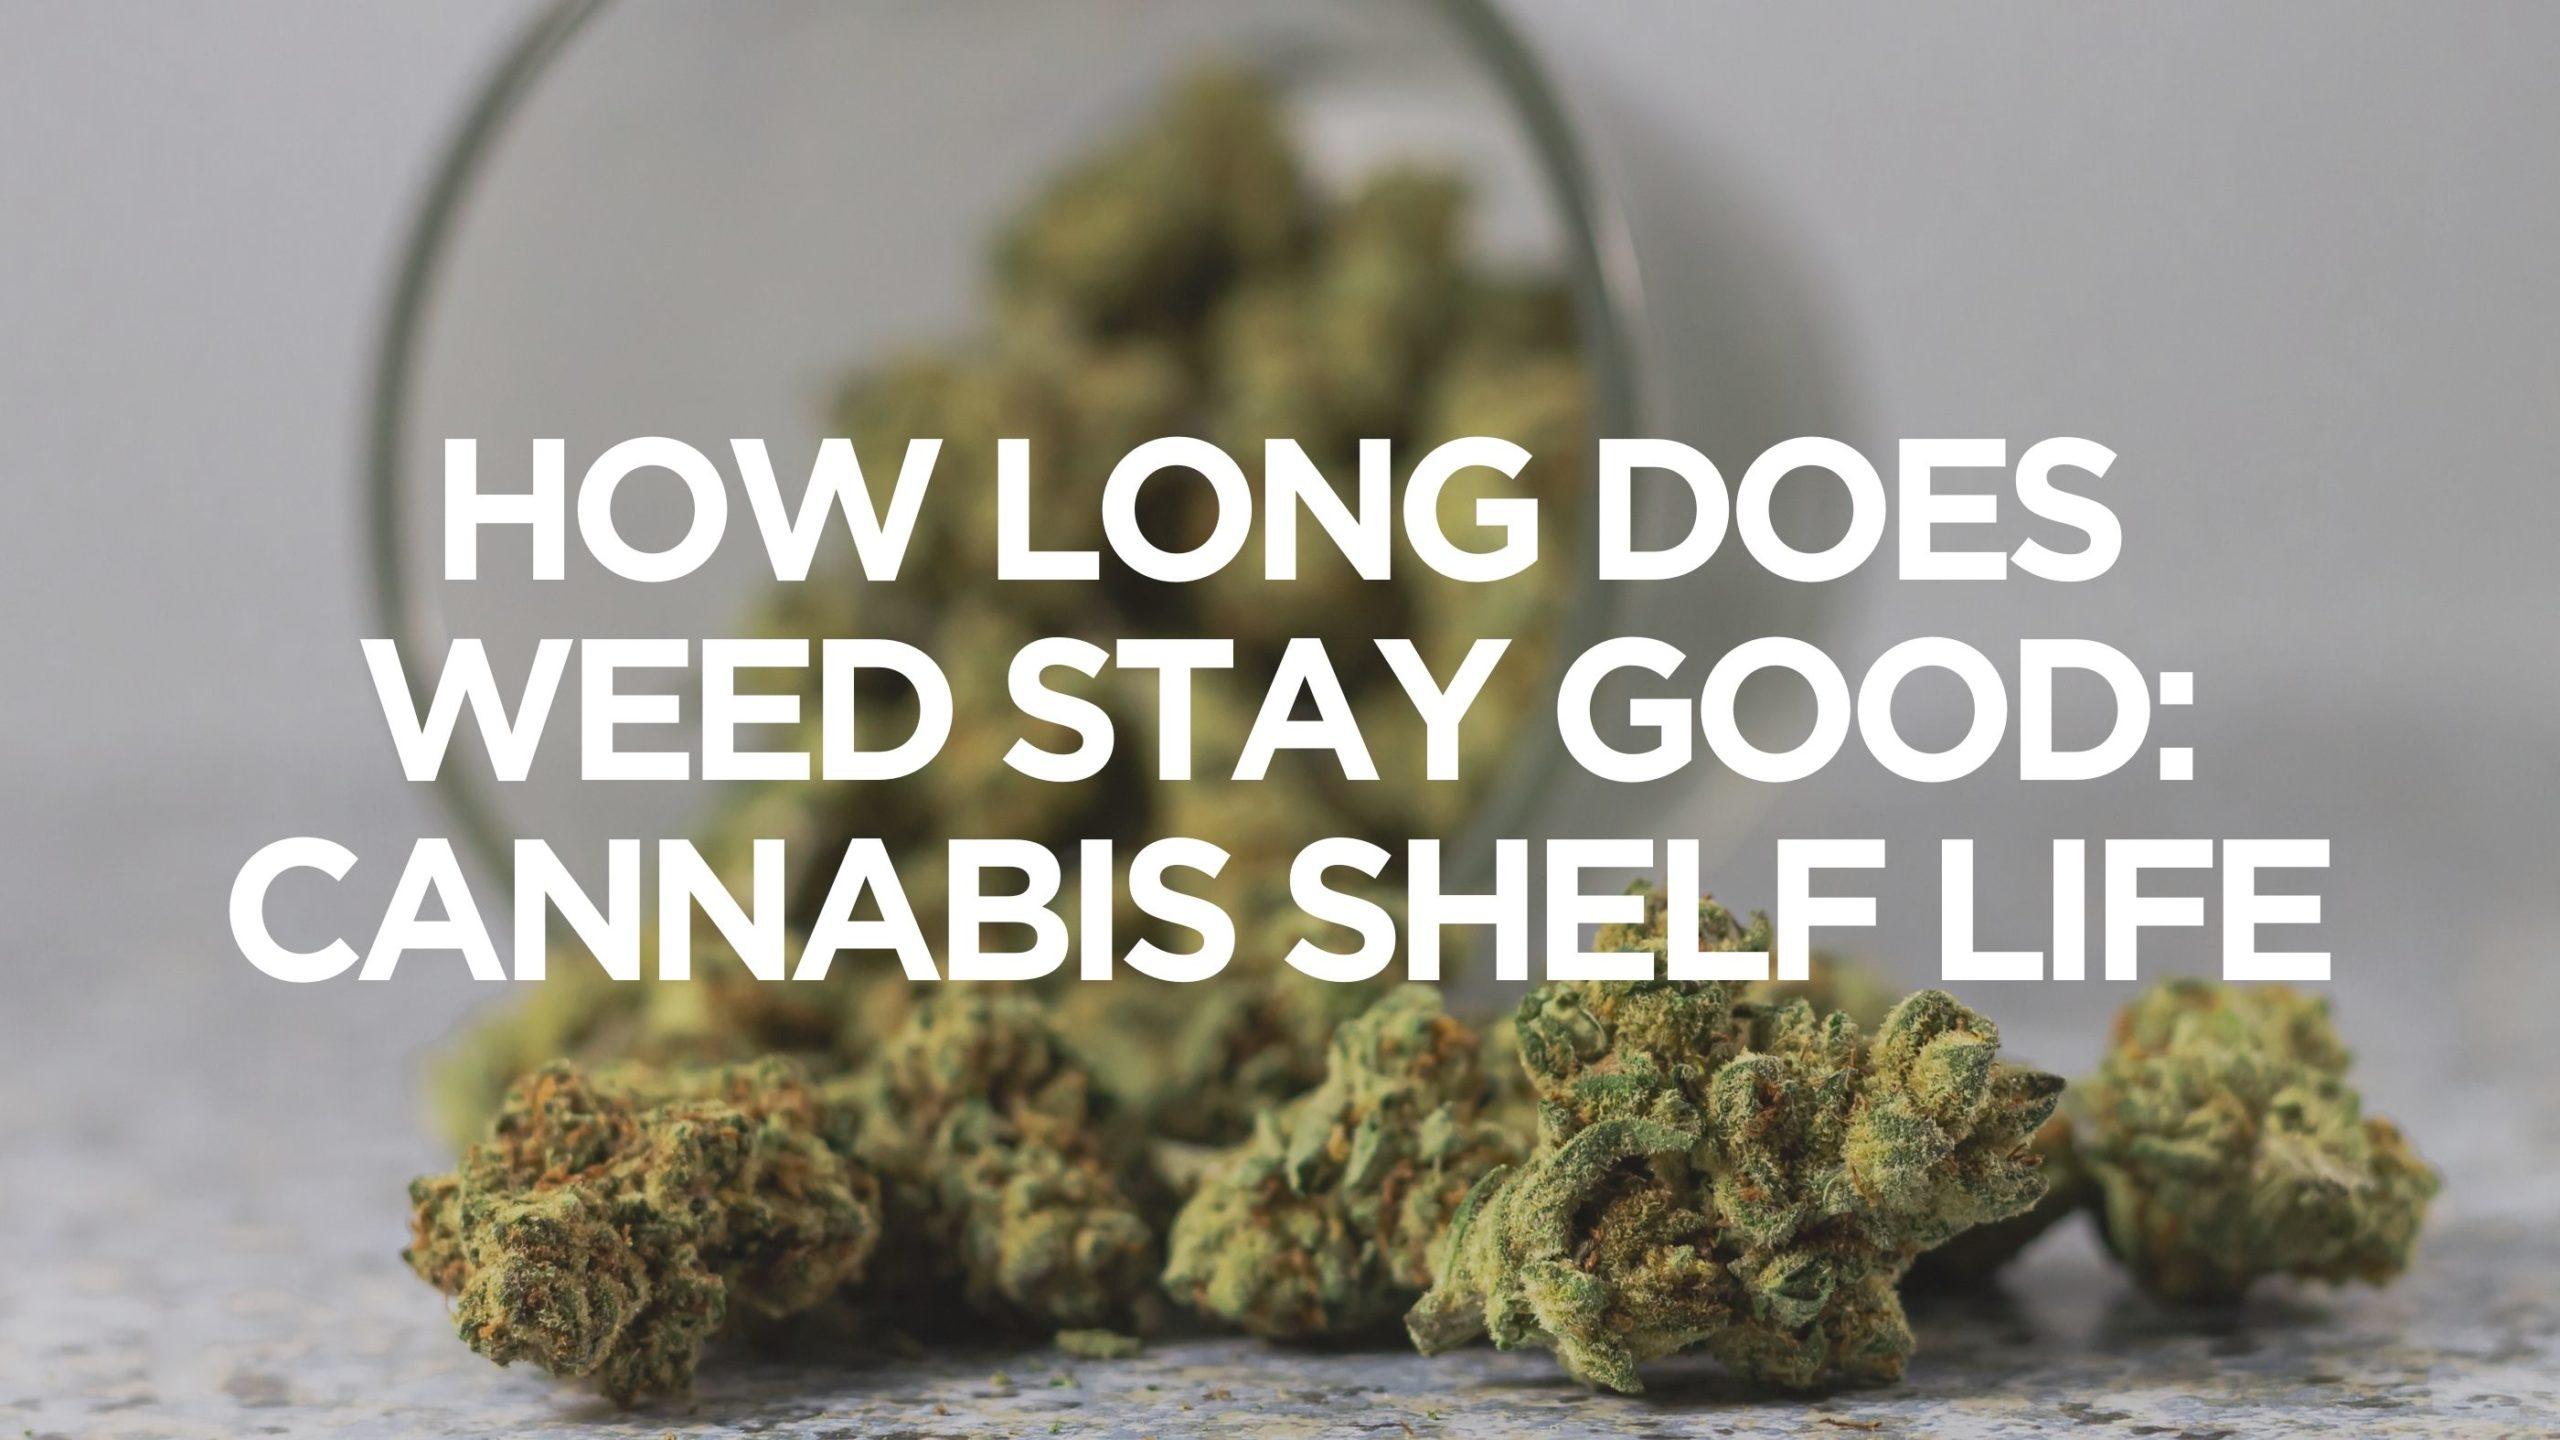 Does weed stay good? Does weed last?